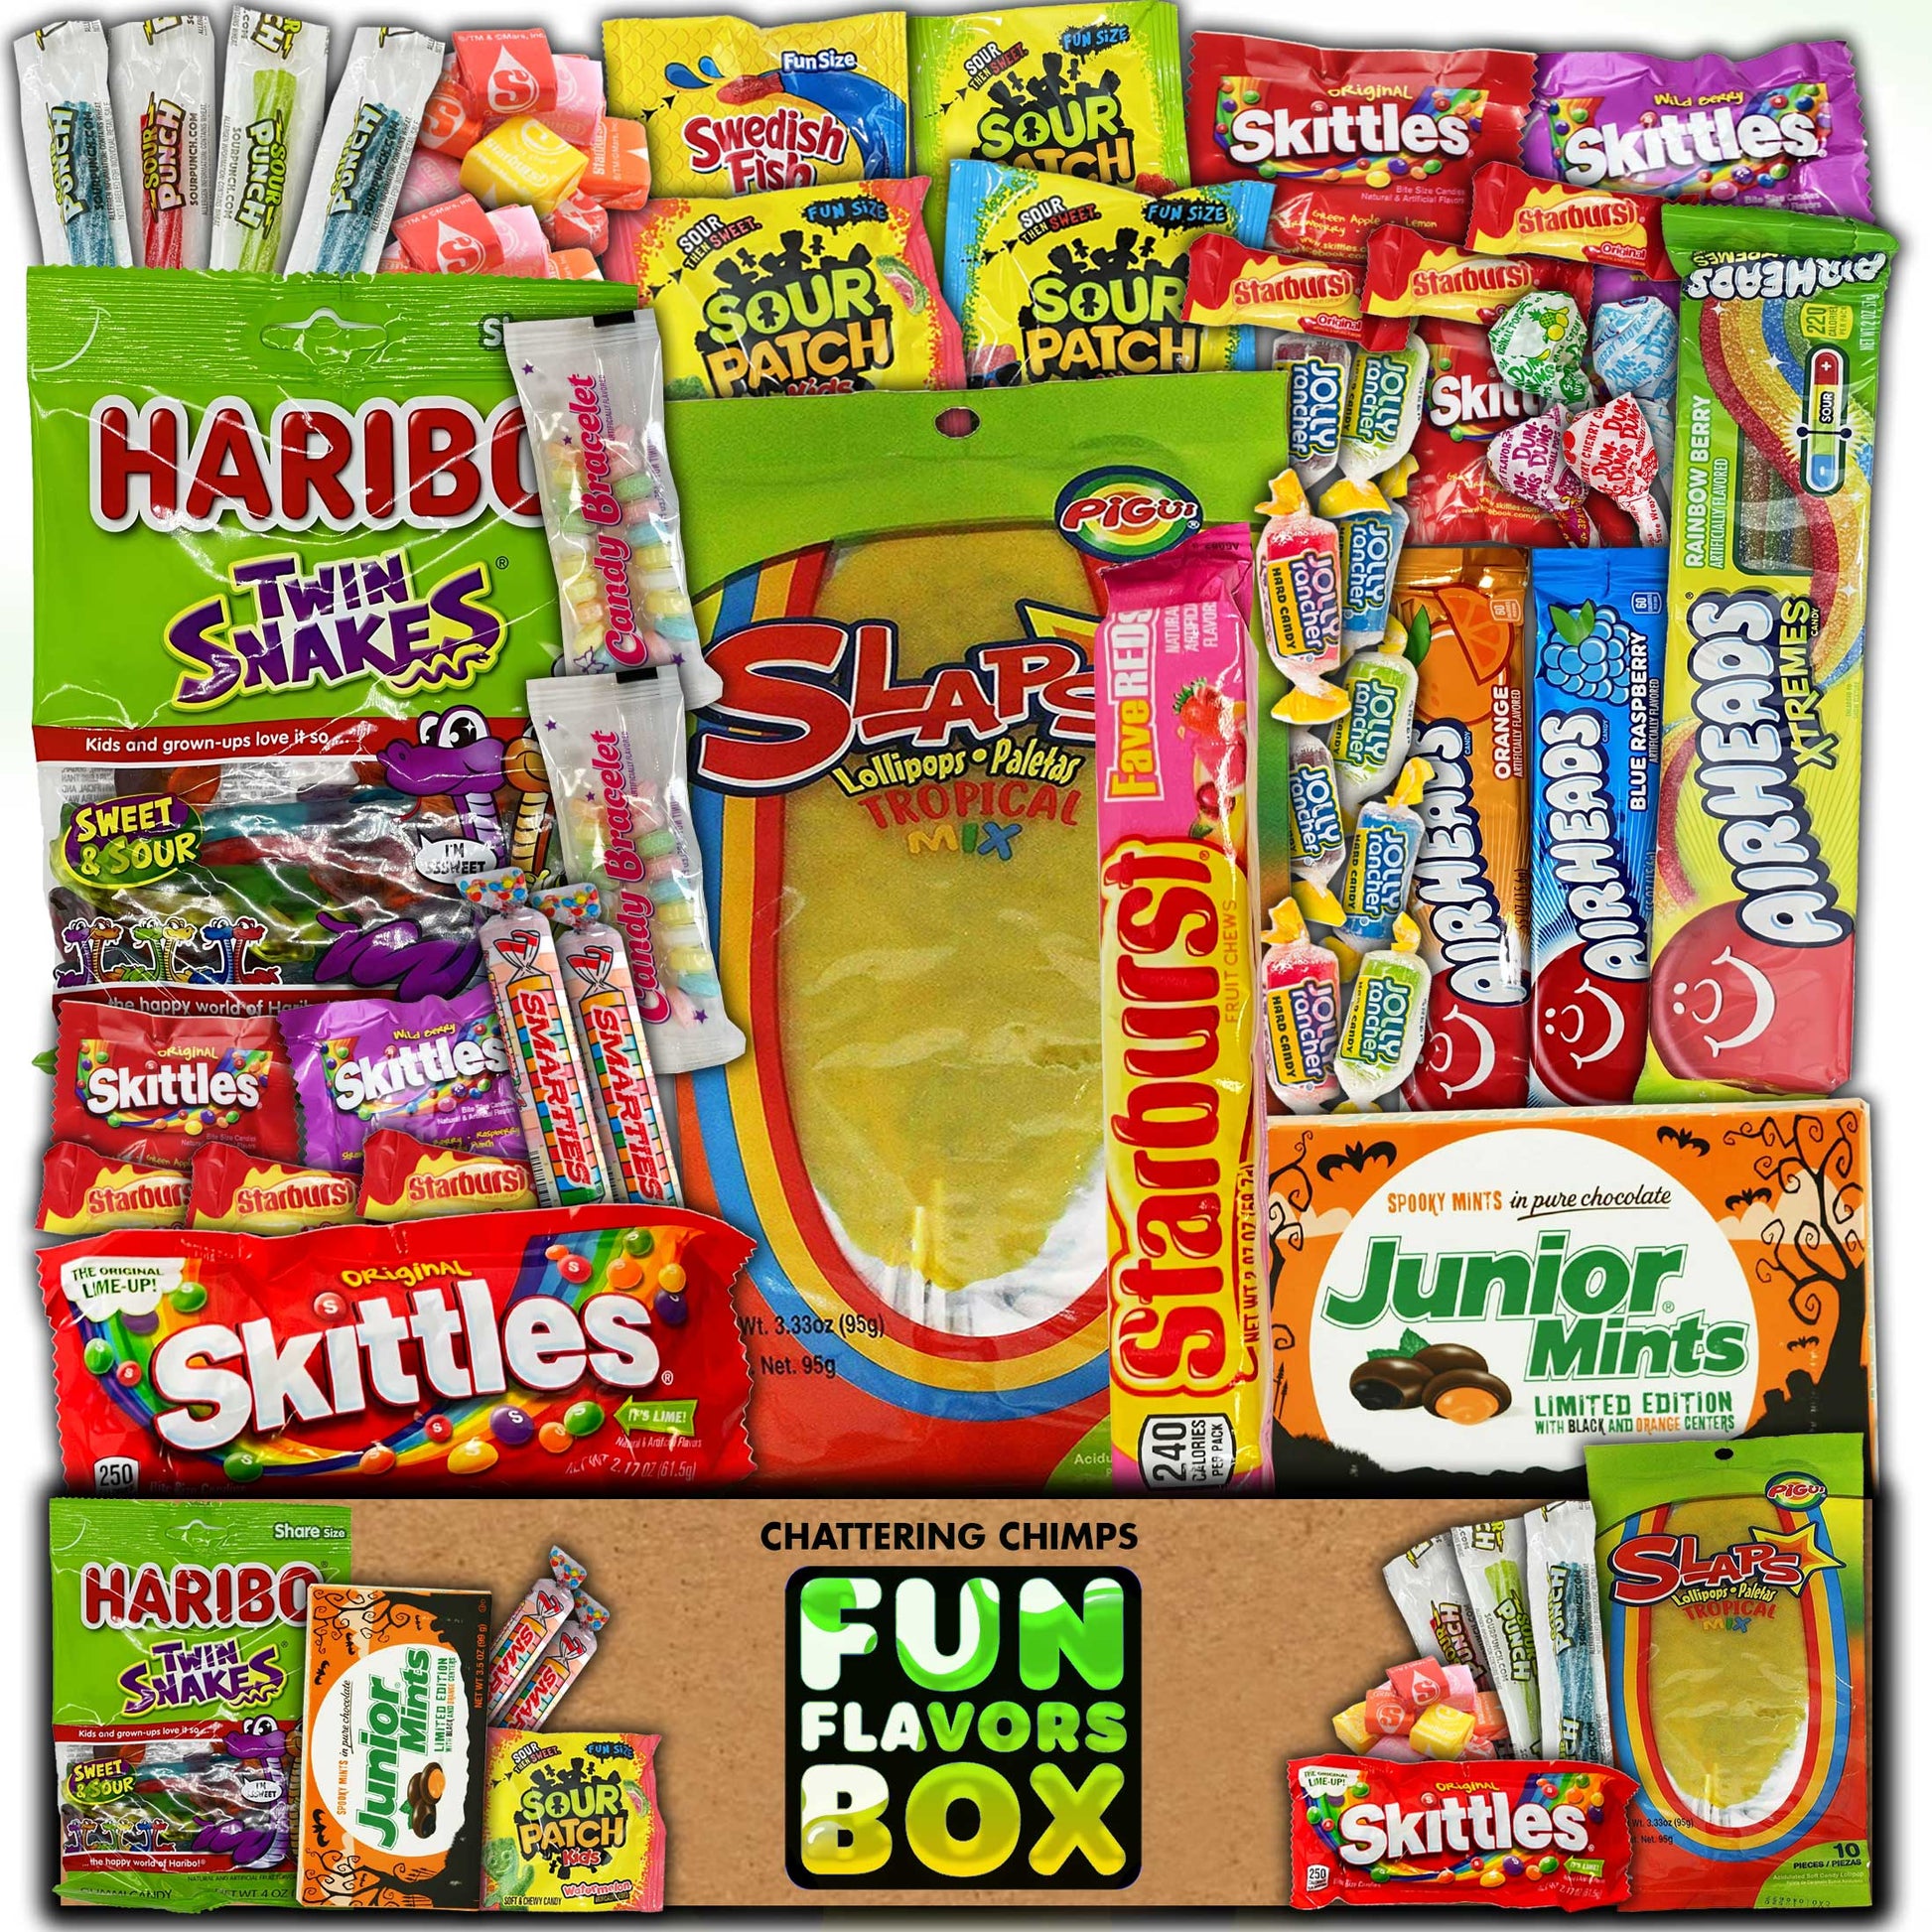 Party in the USA Snack Box